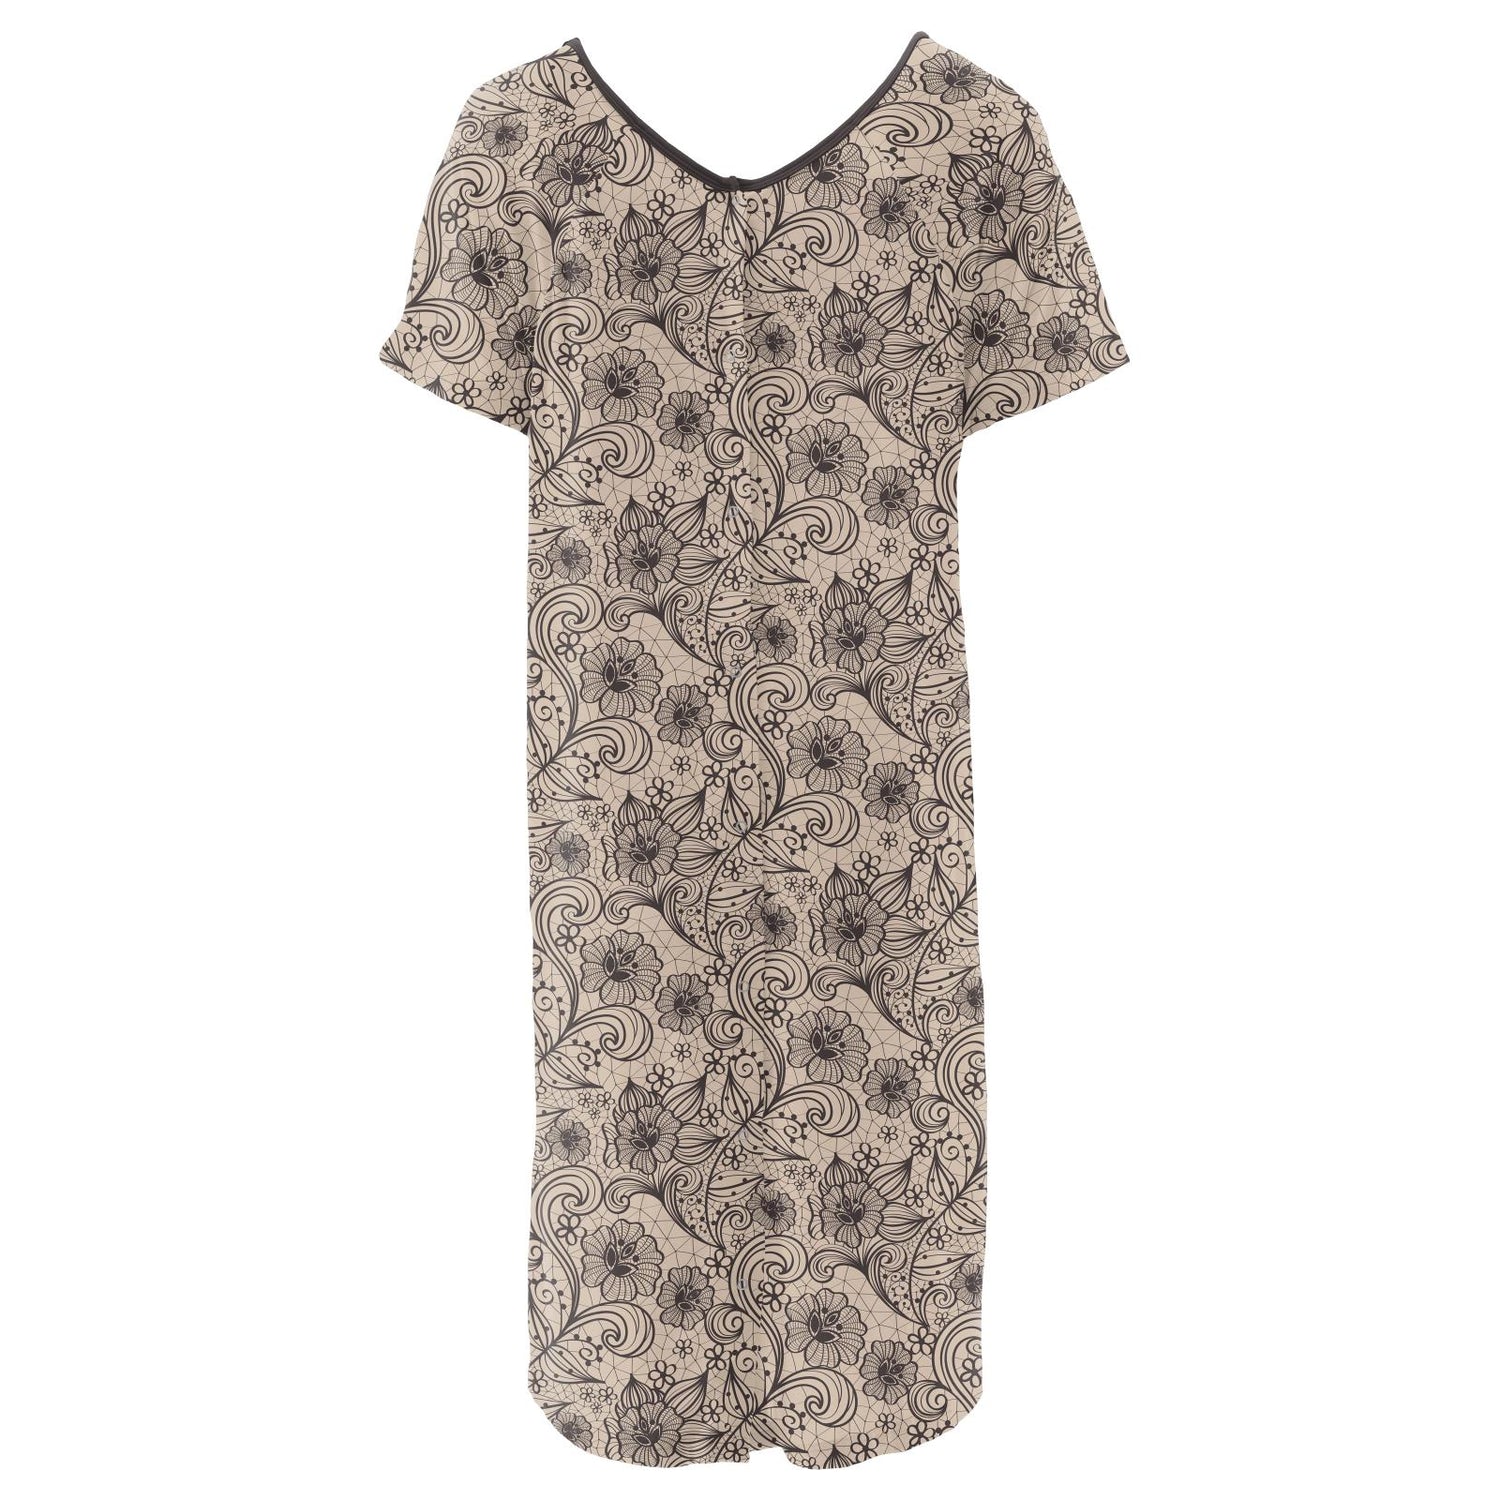 Women's Print Hospital Gown in Burlap Lace